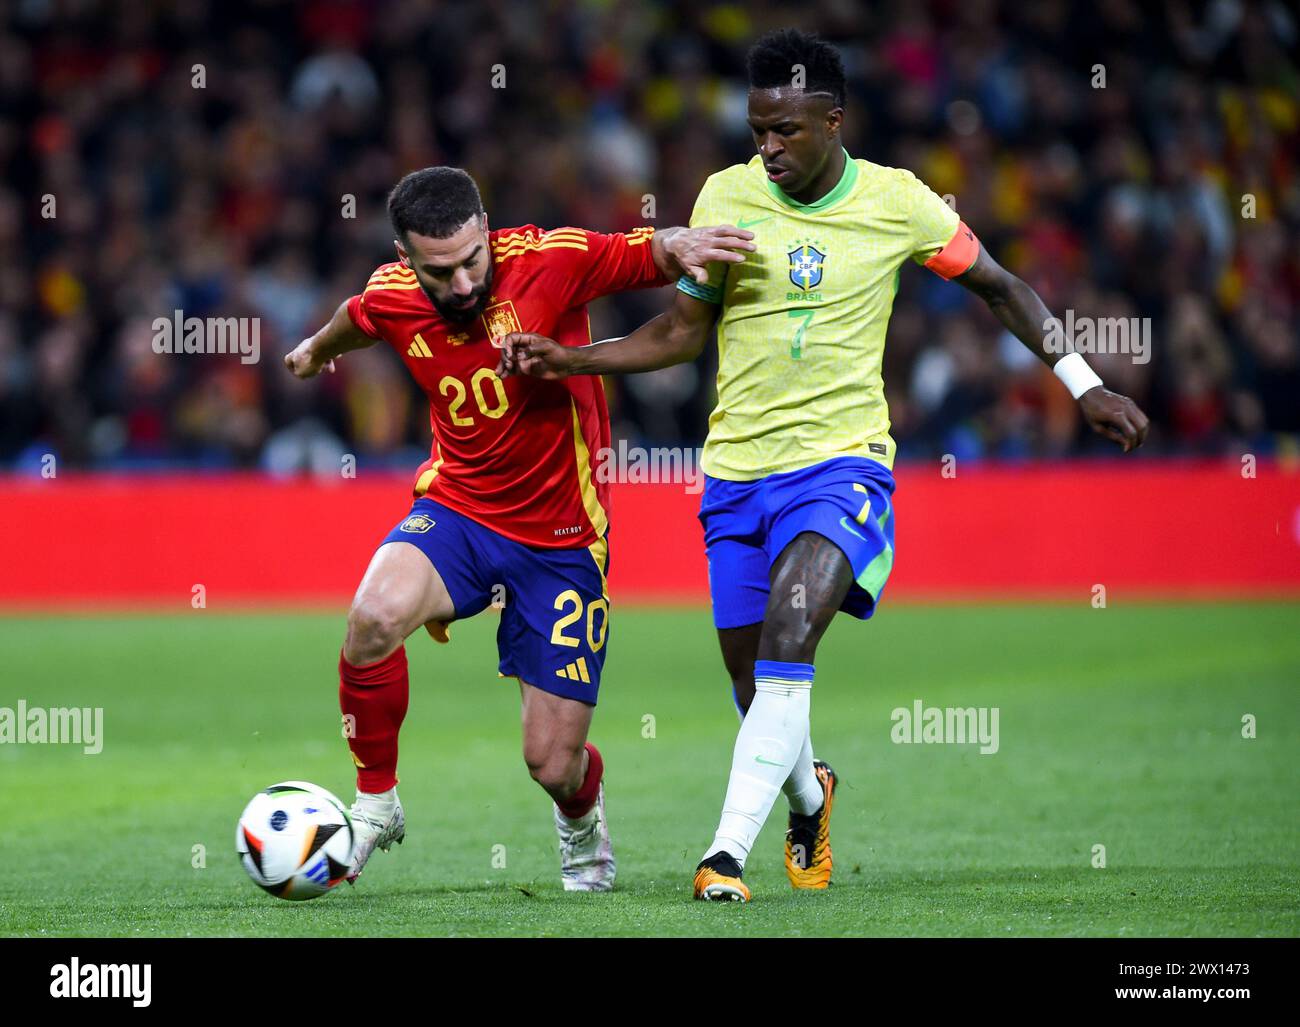 Madrid, Spain. 26th Mar, 2024. Spain's Daniel Carvajal (L) vies with Brazil's Vinicius Junior during an international friendly football match in Madrid, Spain, March 26, 2024. Credit: Gustavo Valiente/Xinhua/Alamy Live News Stock Photo